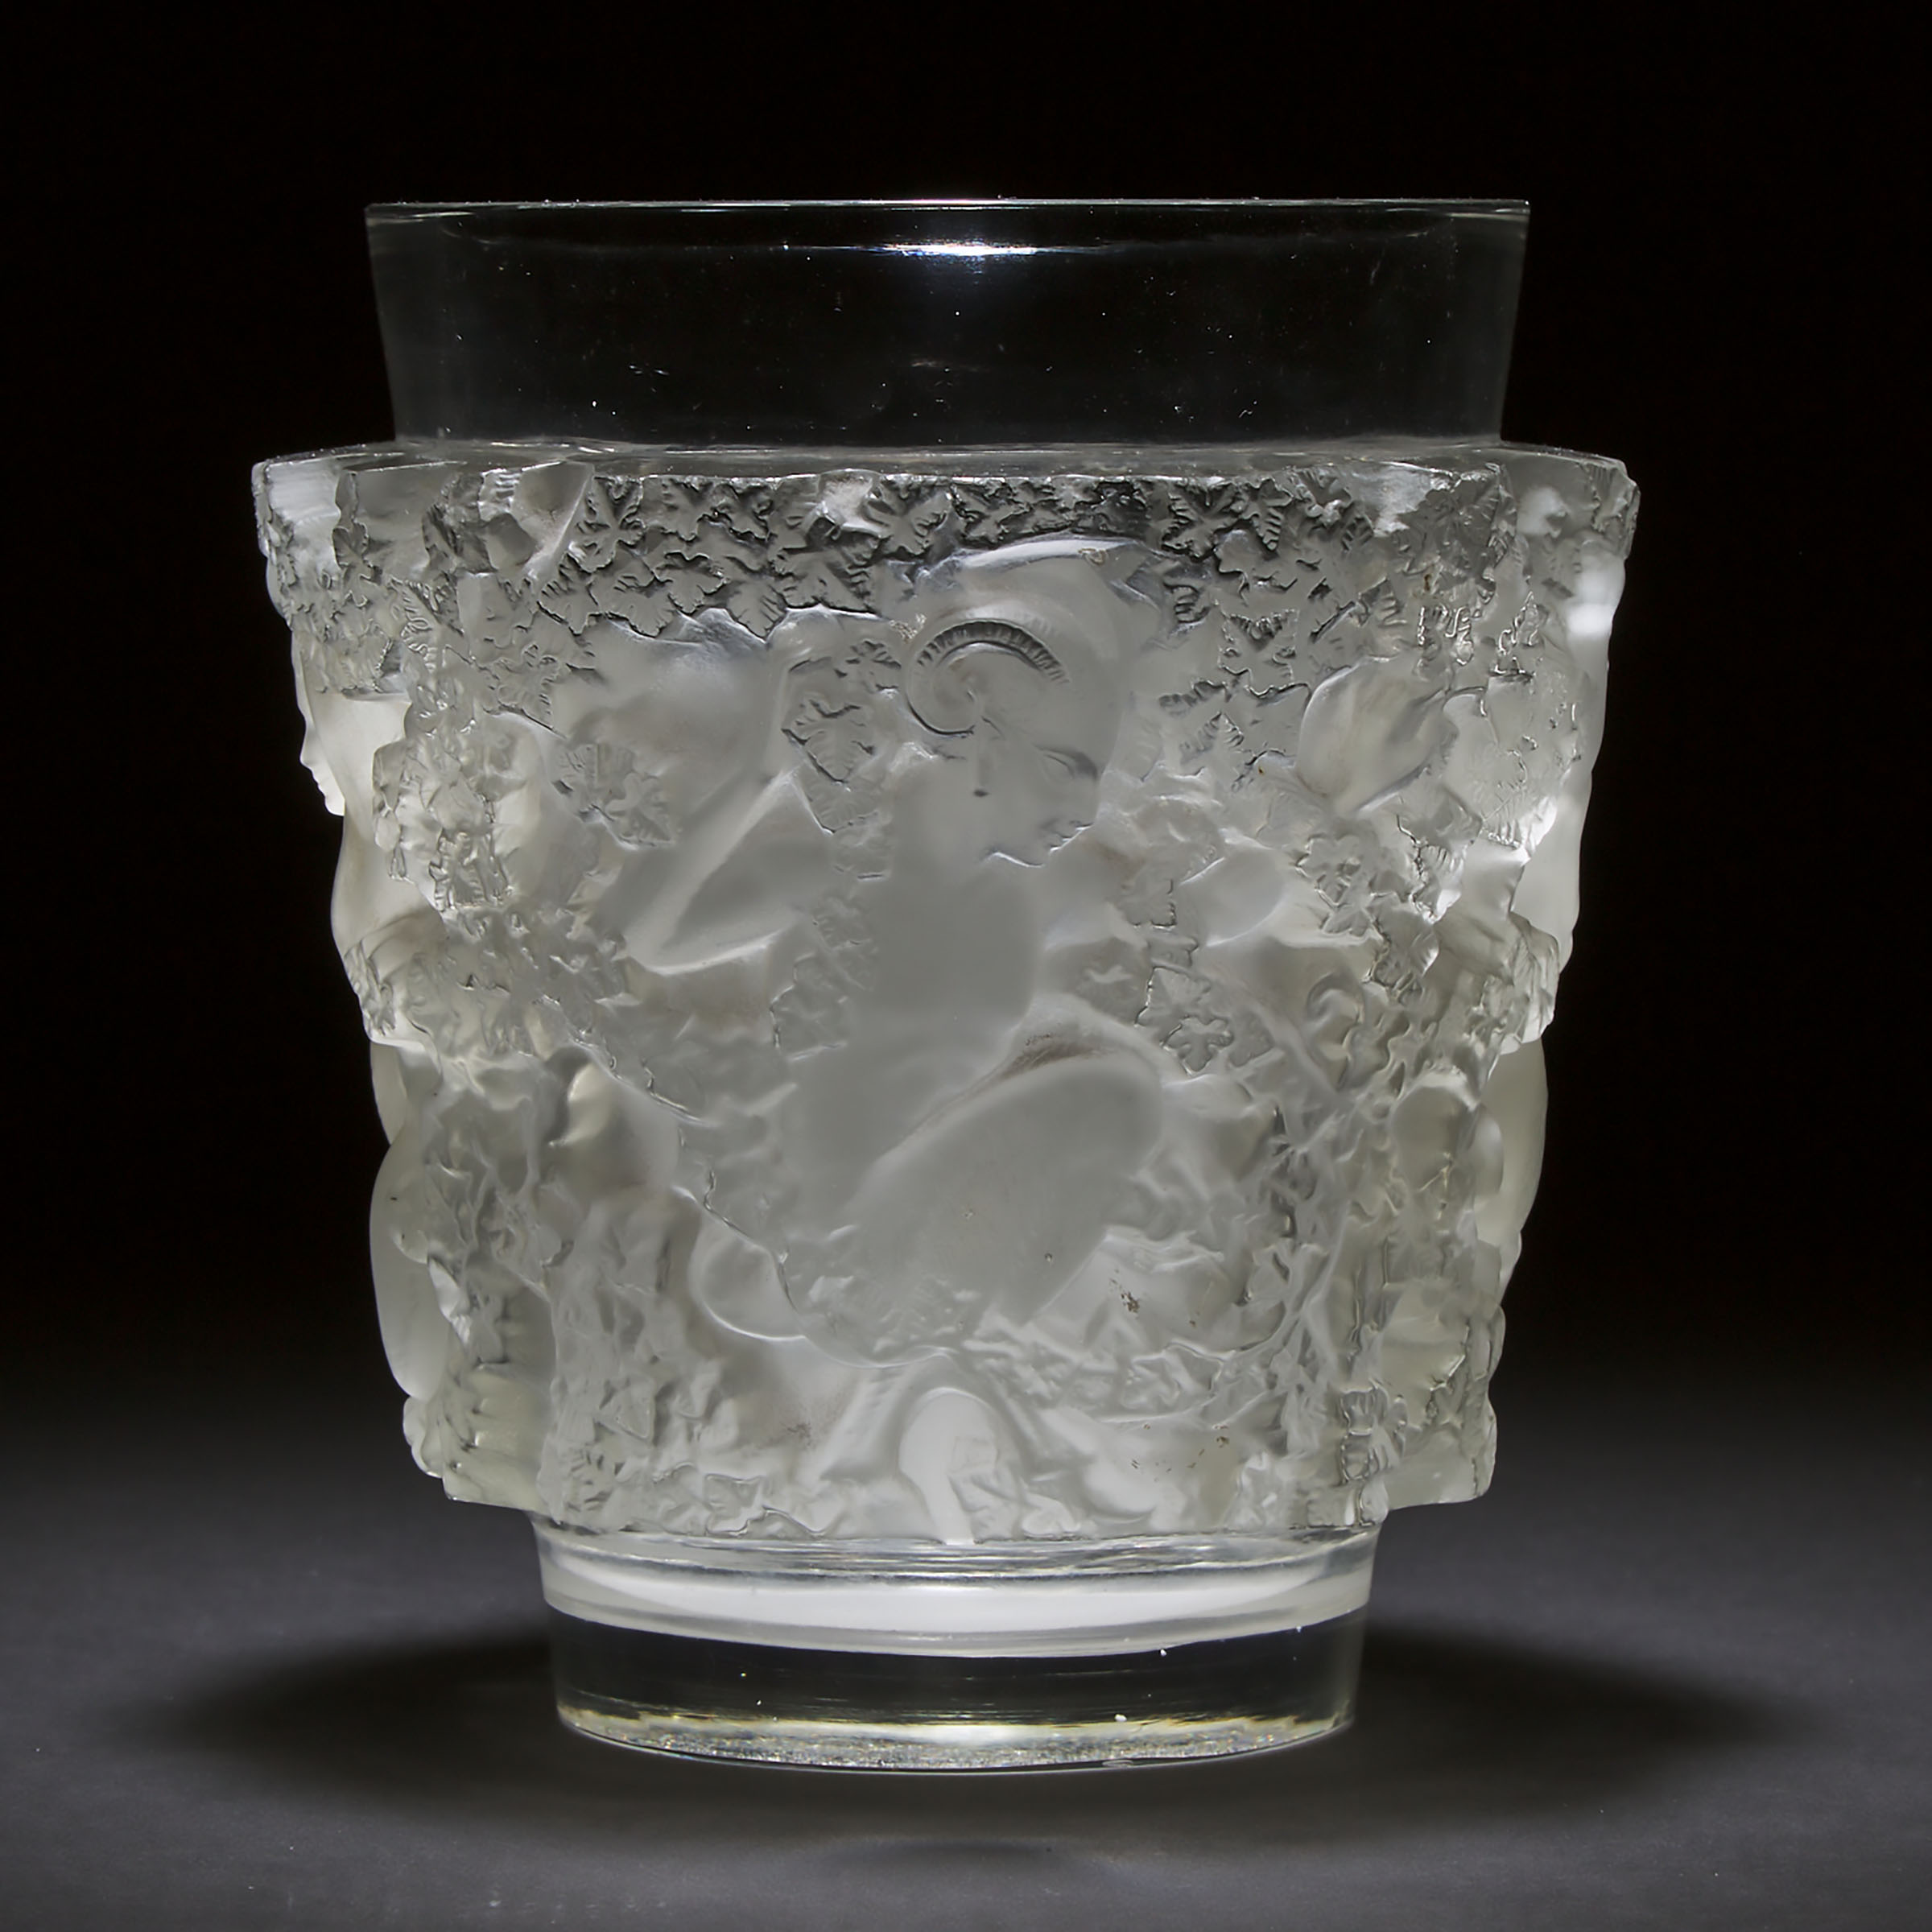 'Bacchus', Lalique Moulded and Partly Frosted Glass Vase, post-1945